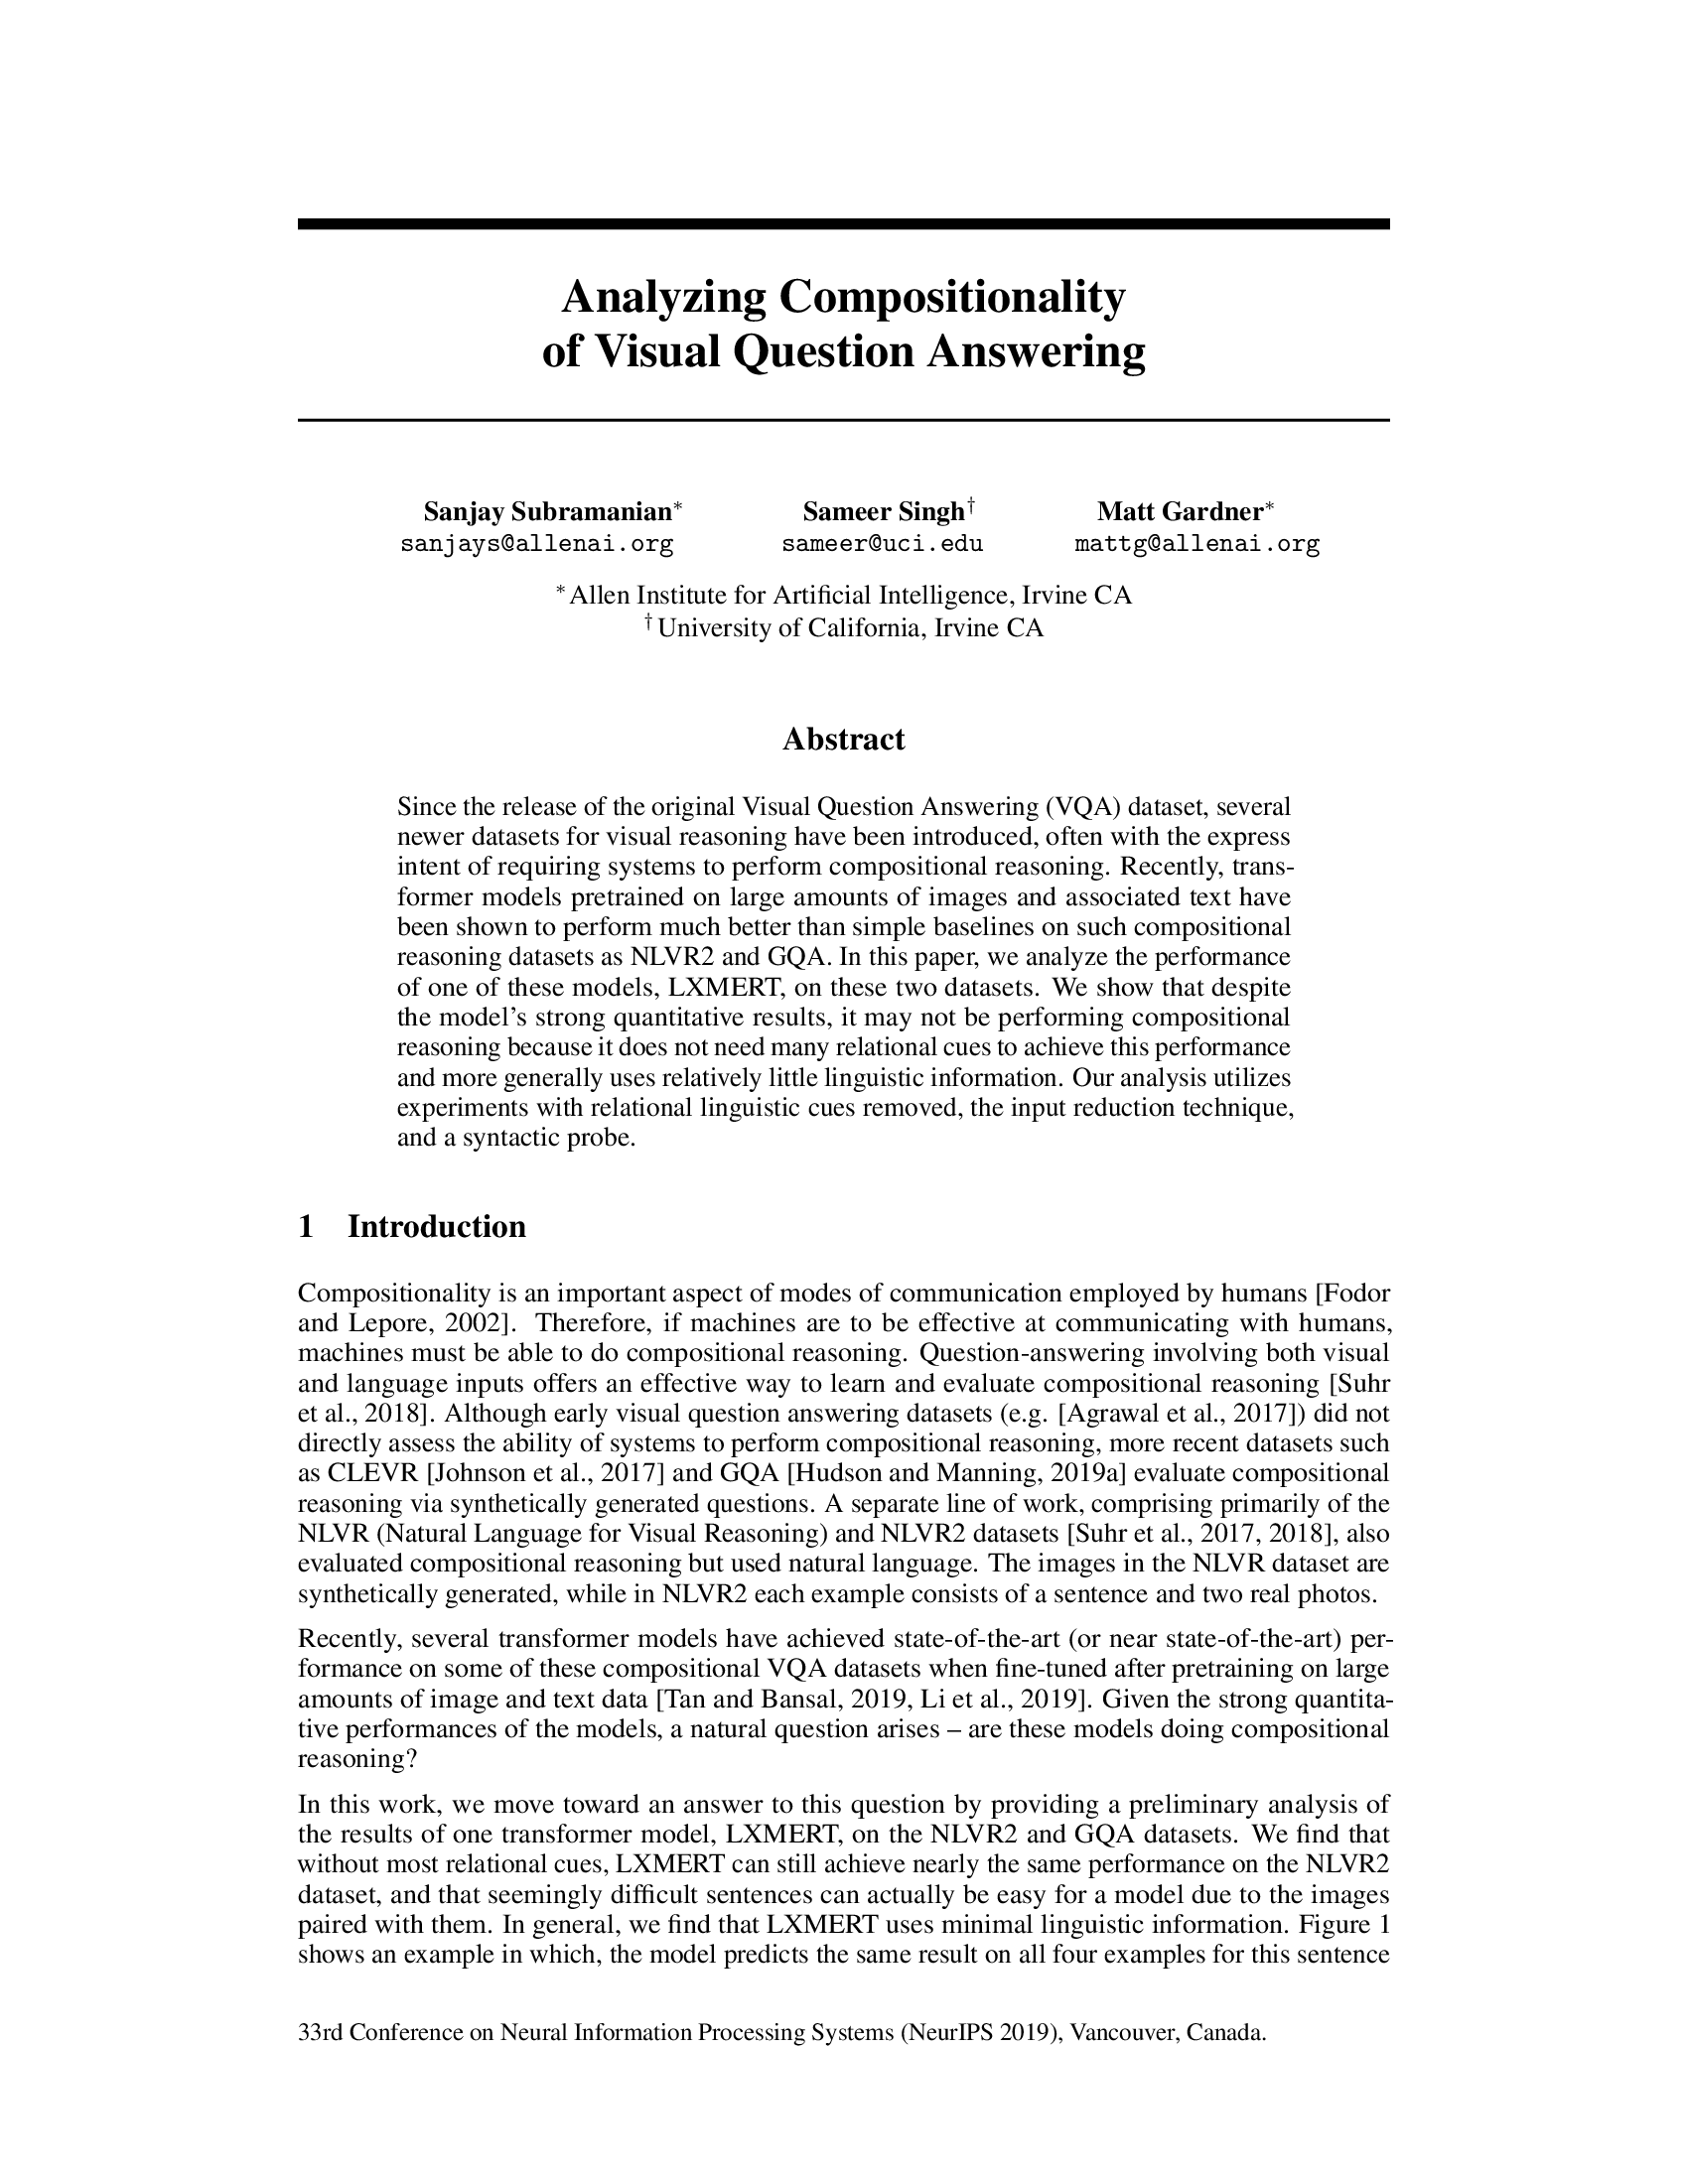 Analyzing Compositionality in Visual Question Answering